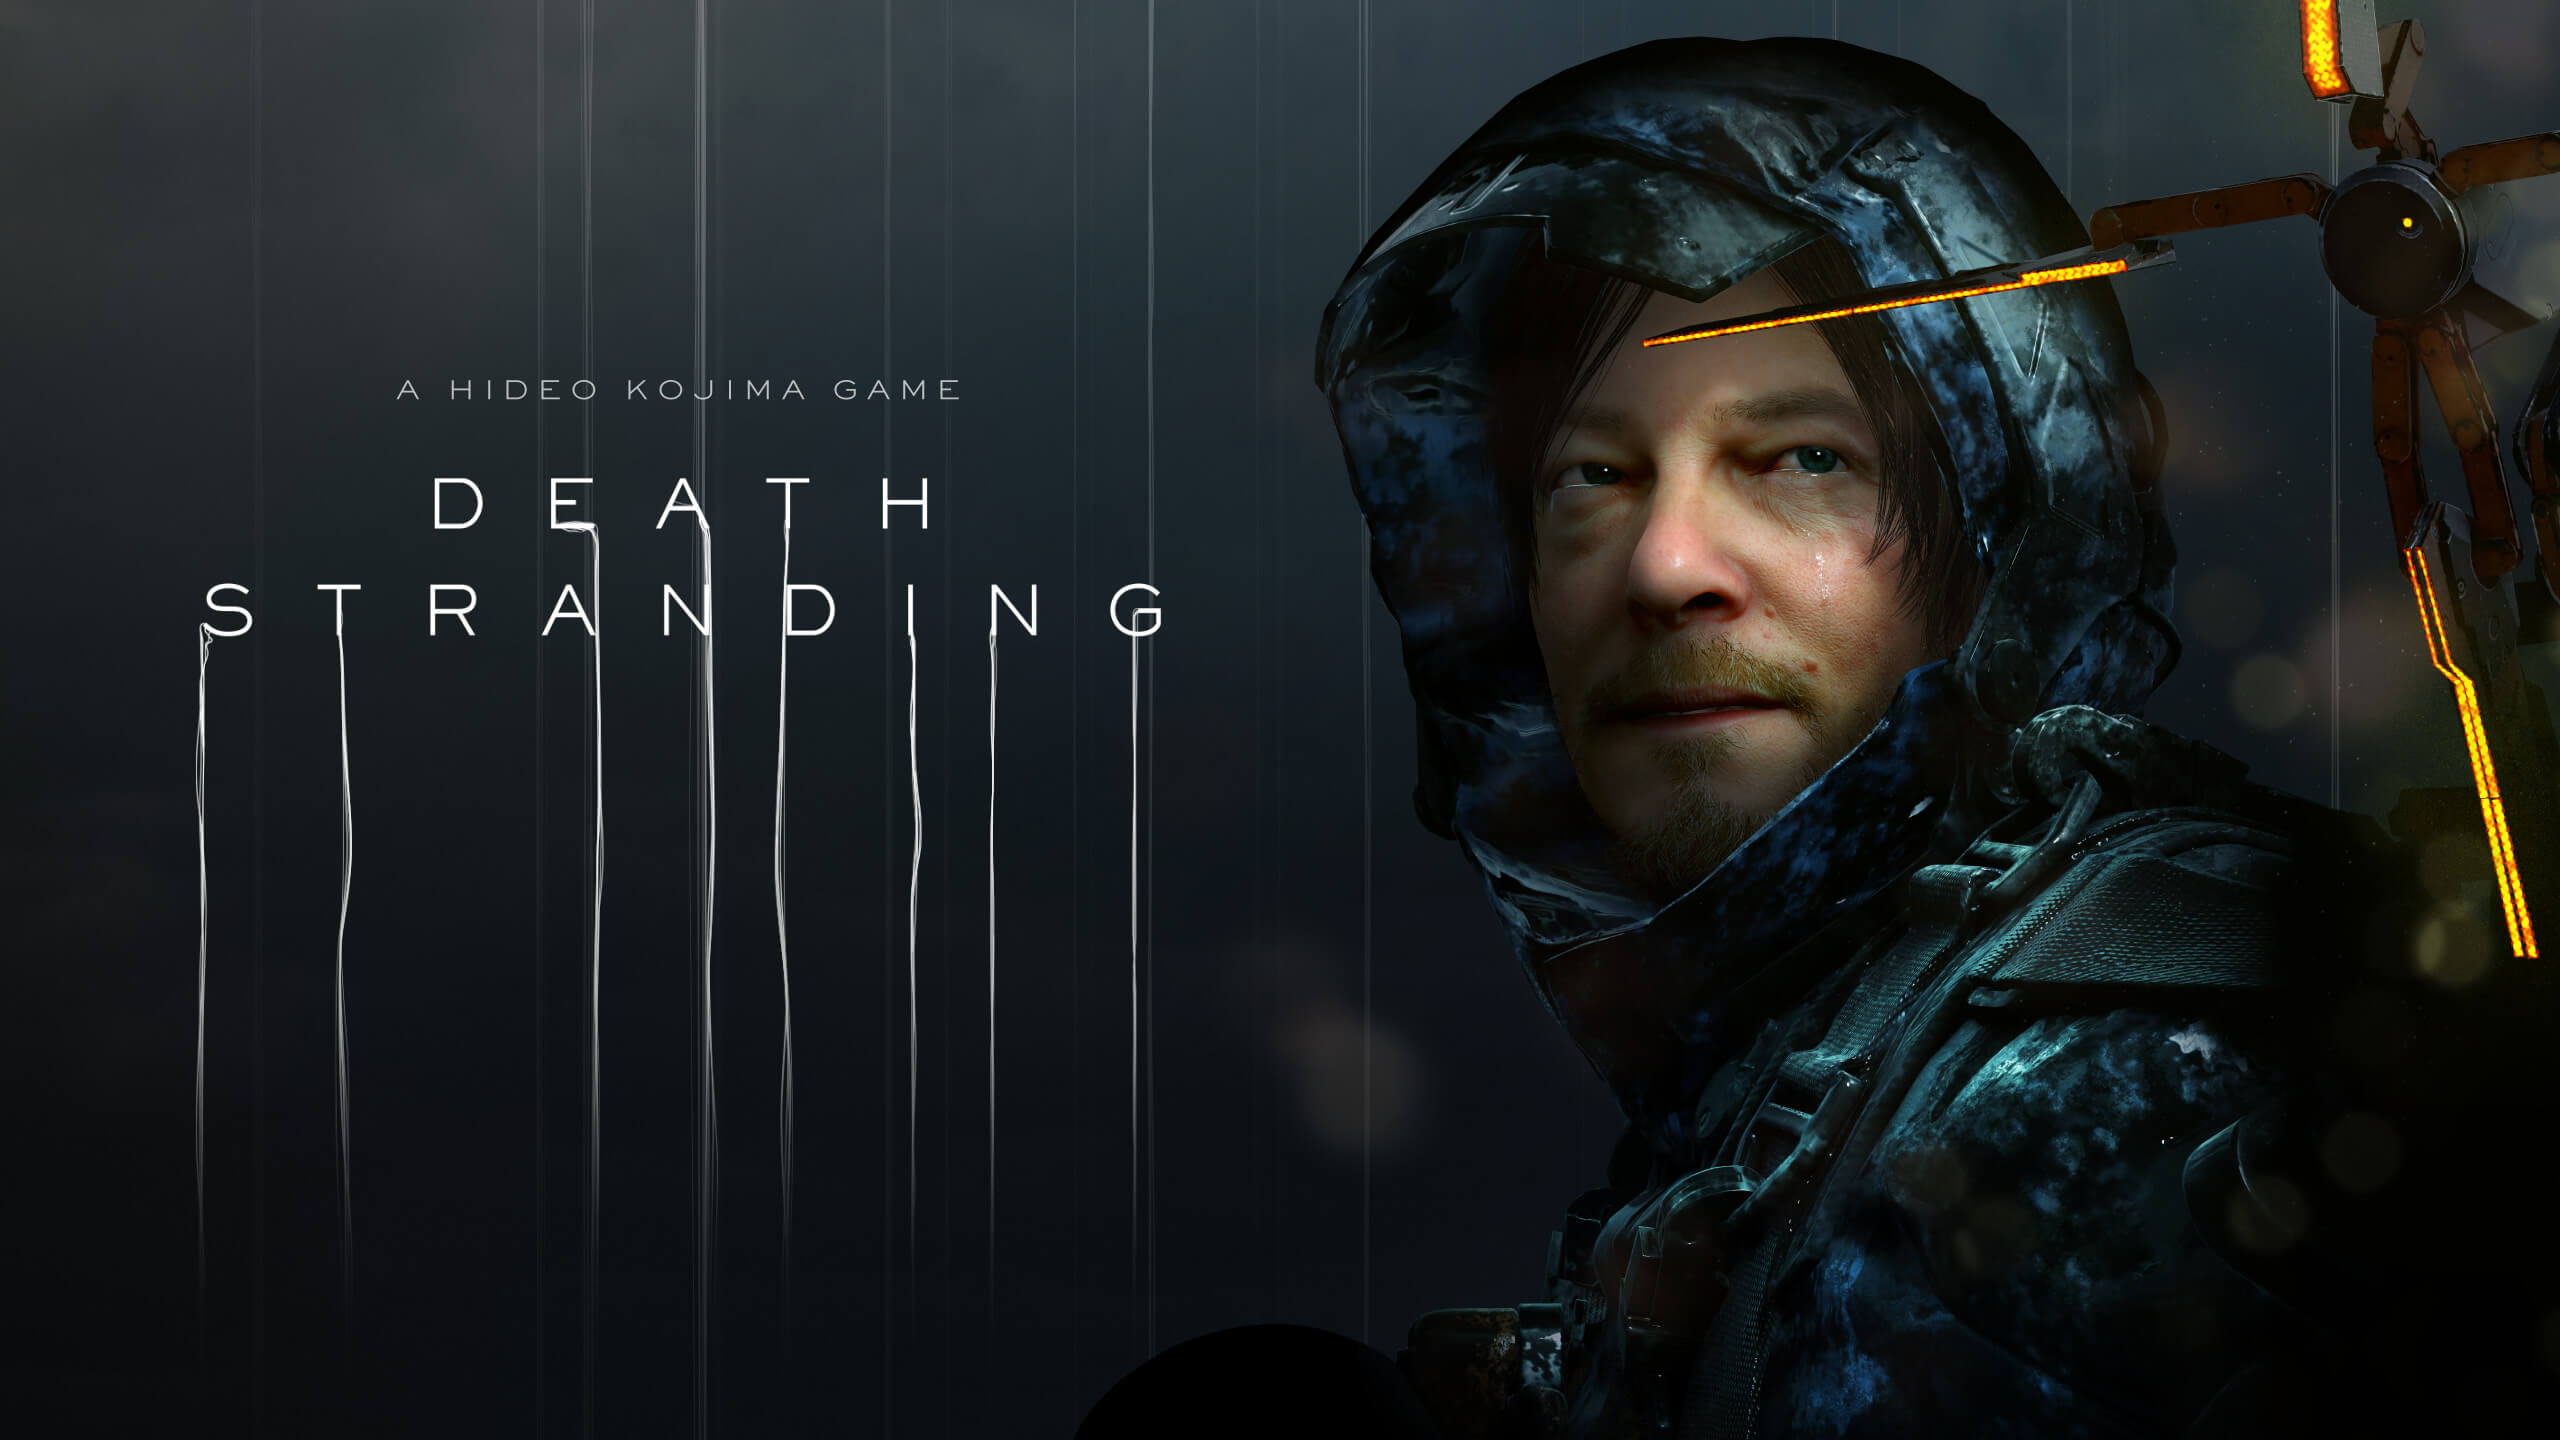 Death Stranding boss trailer introduces 3 new characters: Troy